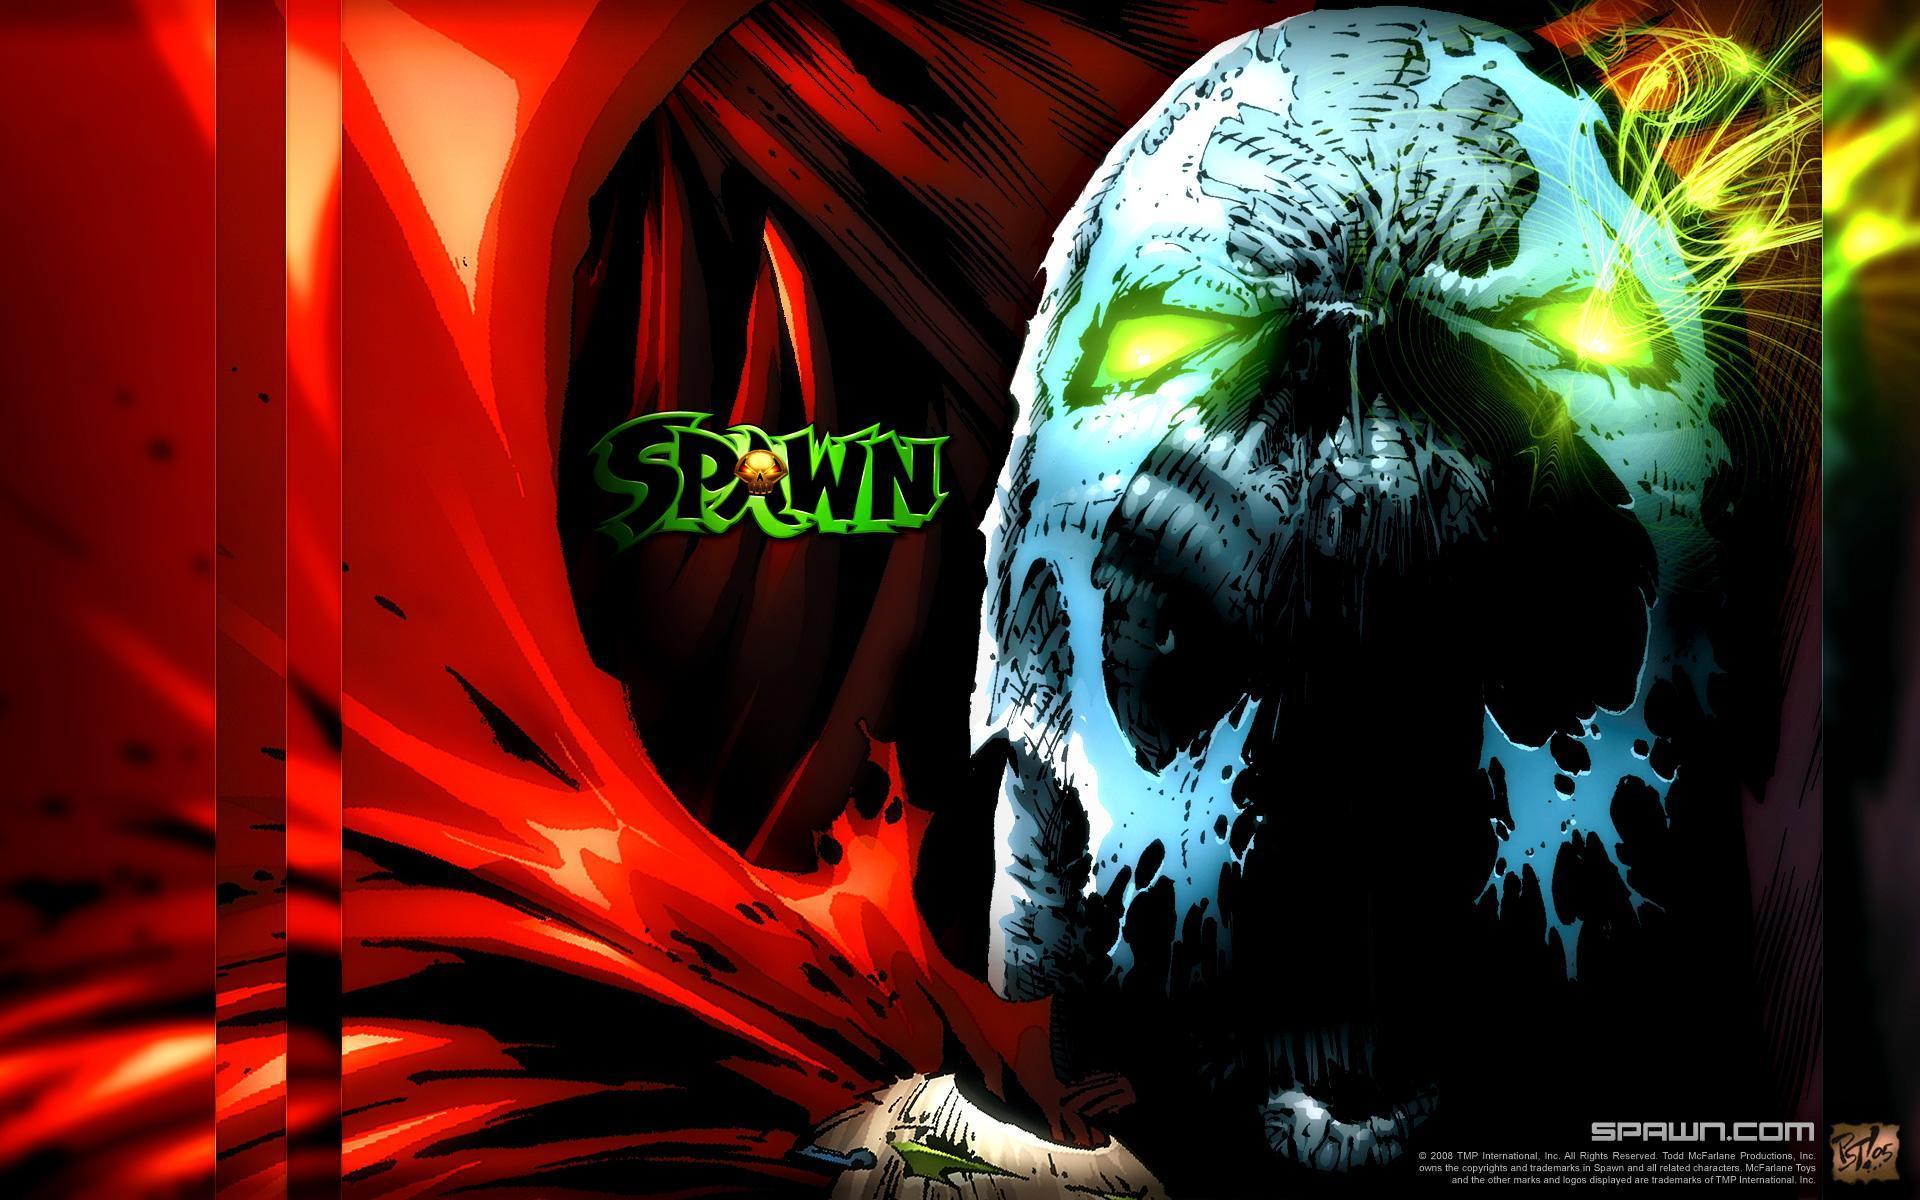 Angry Spawn Wallpaper Background High 1920x1200PX Wallpaper